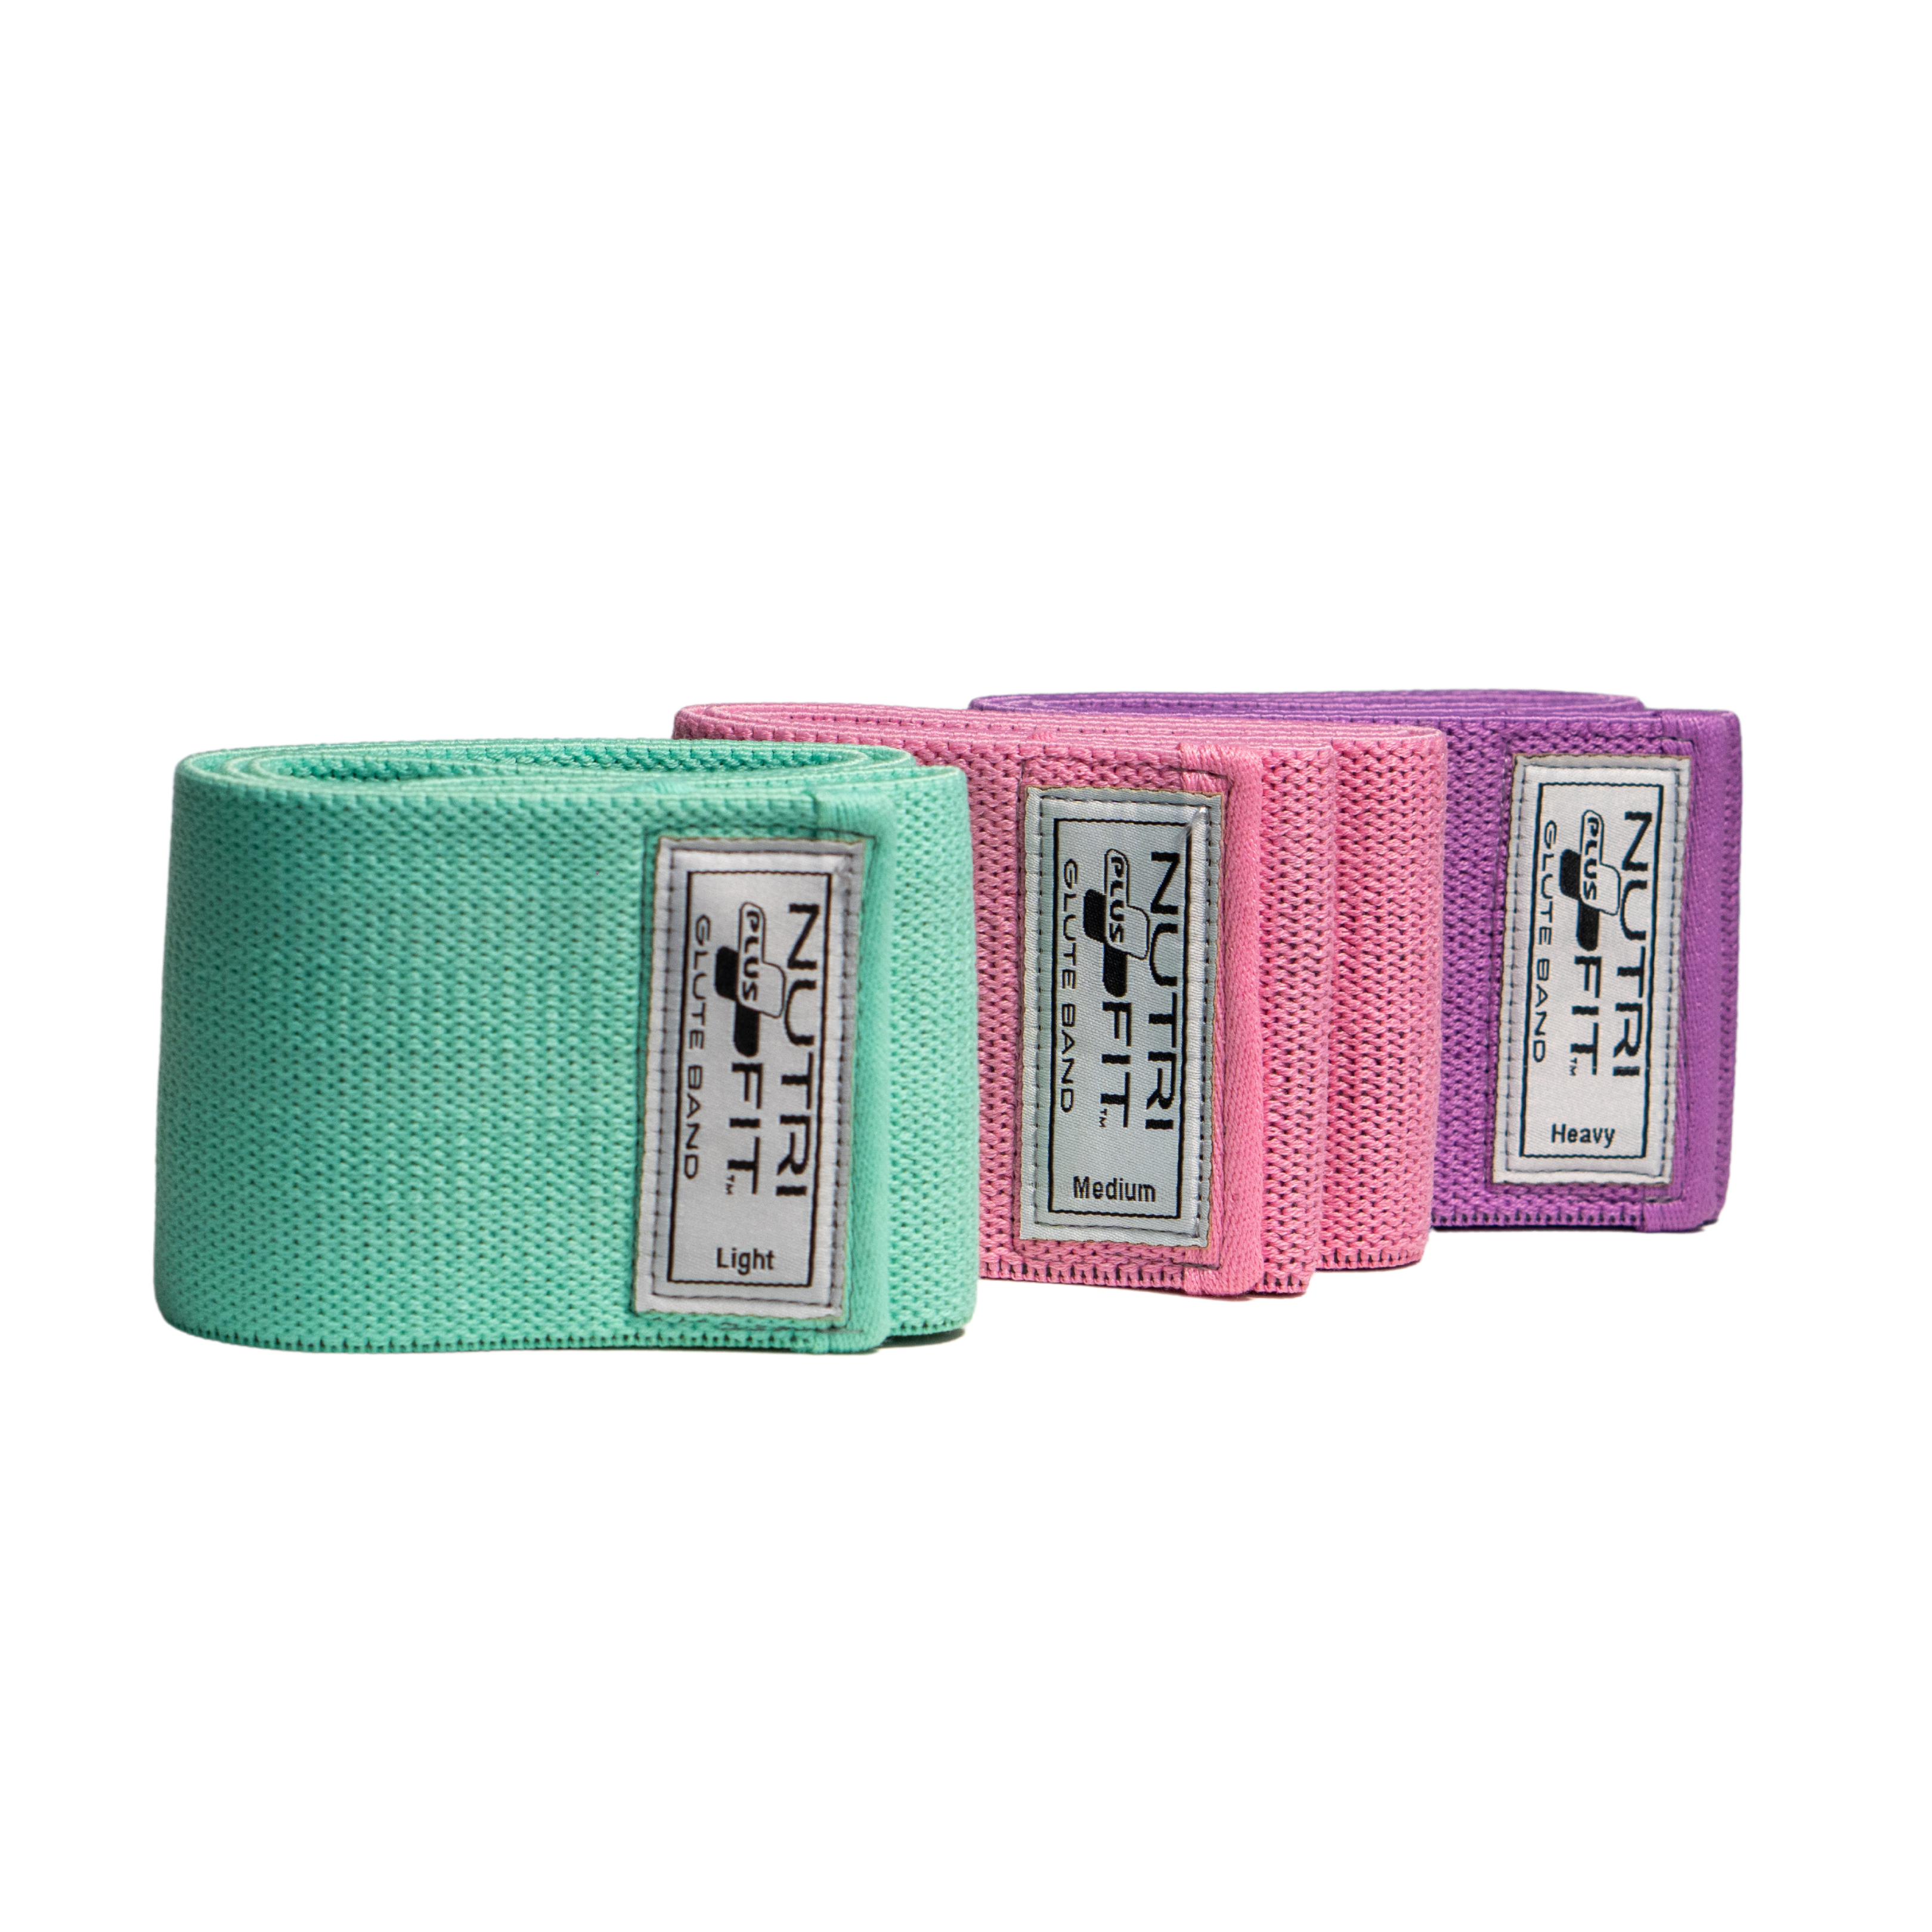 NutriFit Plus Resistance Bands Set - 3 Booty Bands for Legs and Glutes